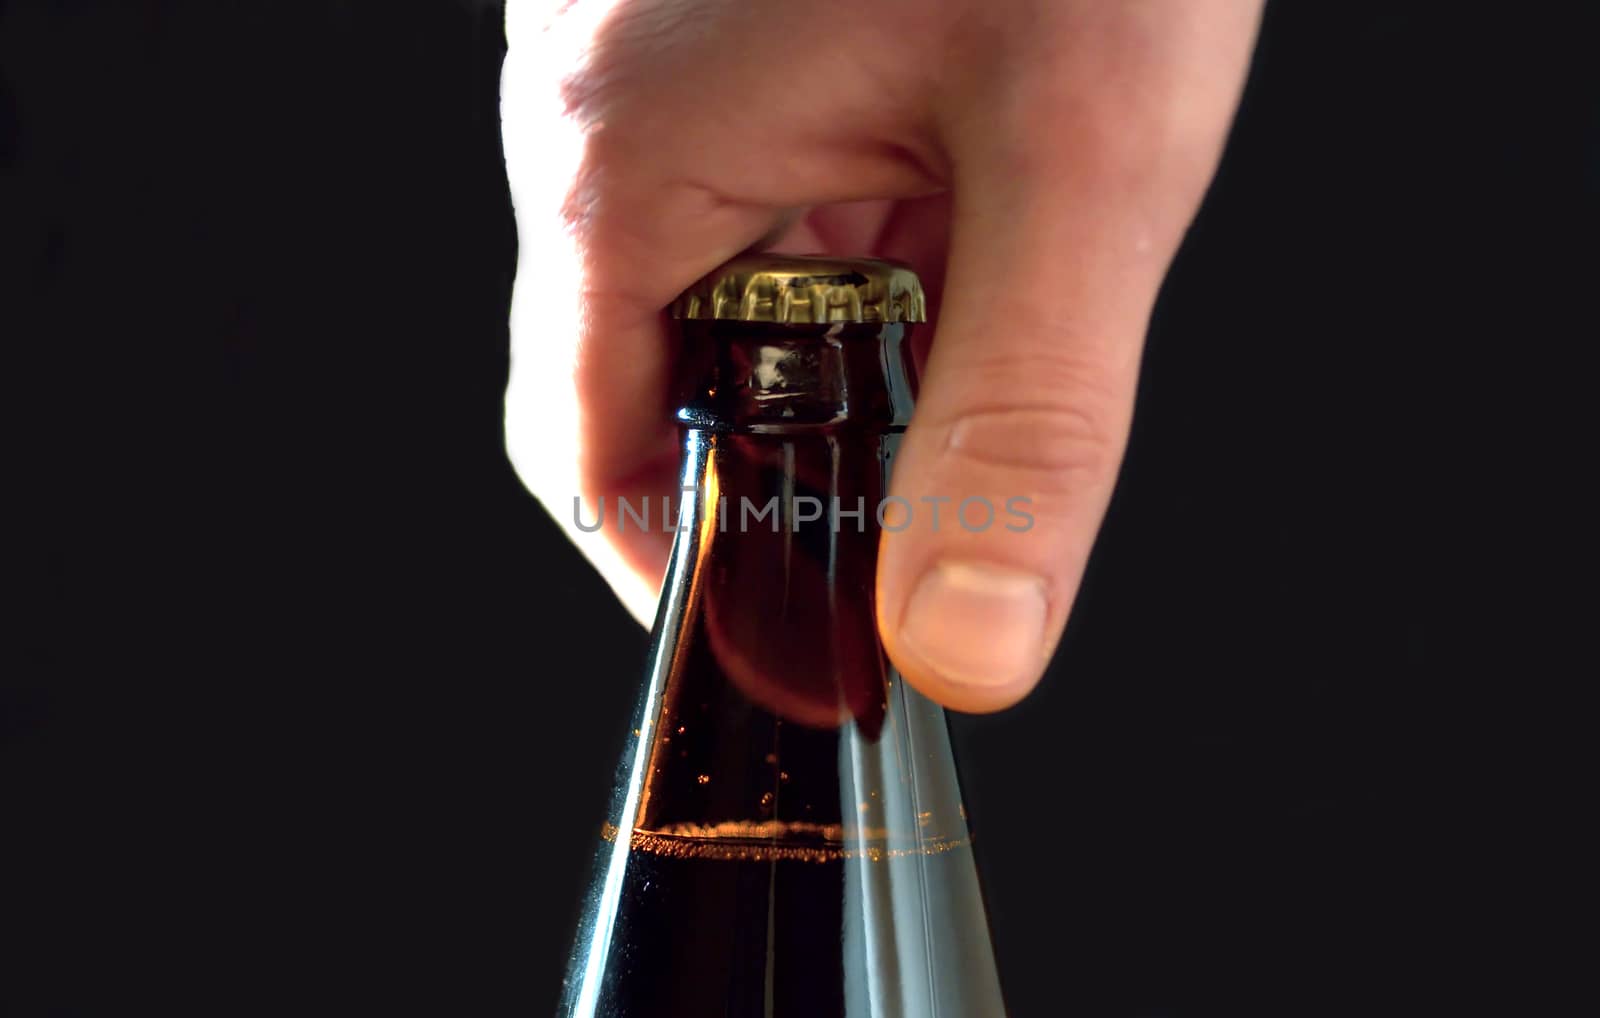 Close up man's hand opening a bottle of beer, side view, black background.